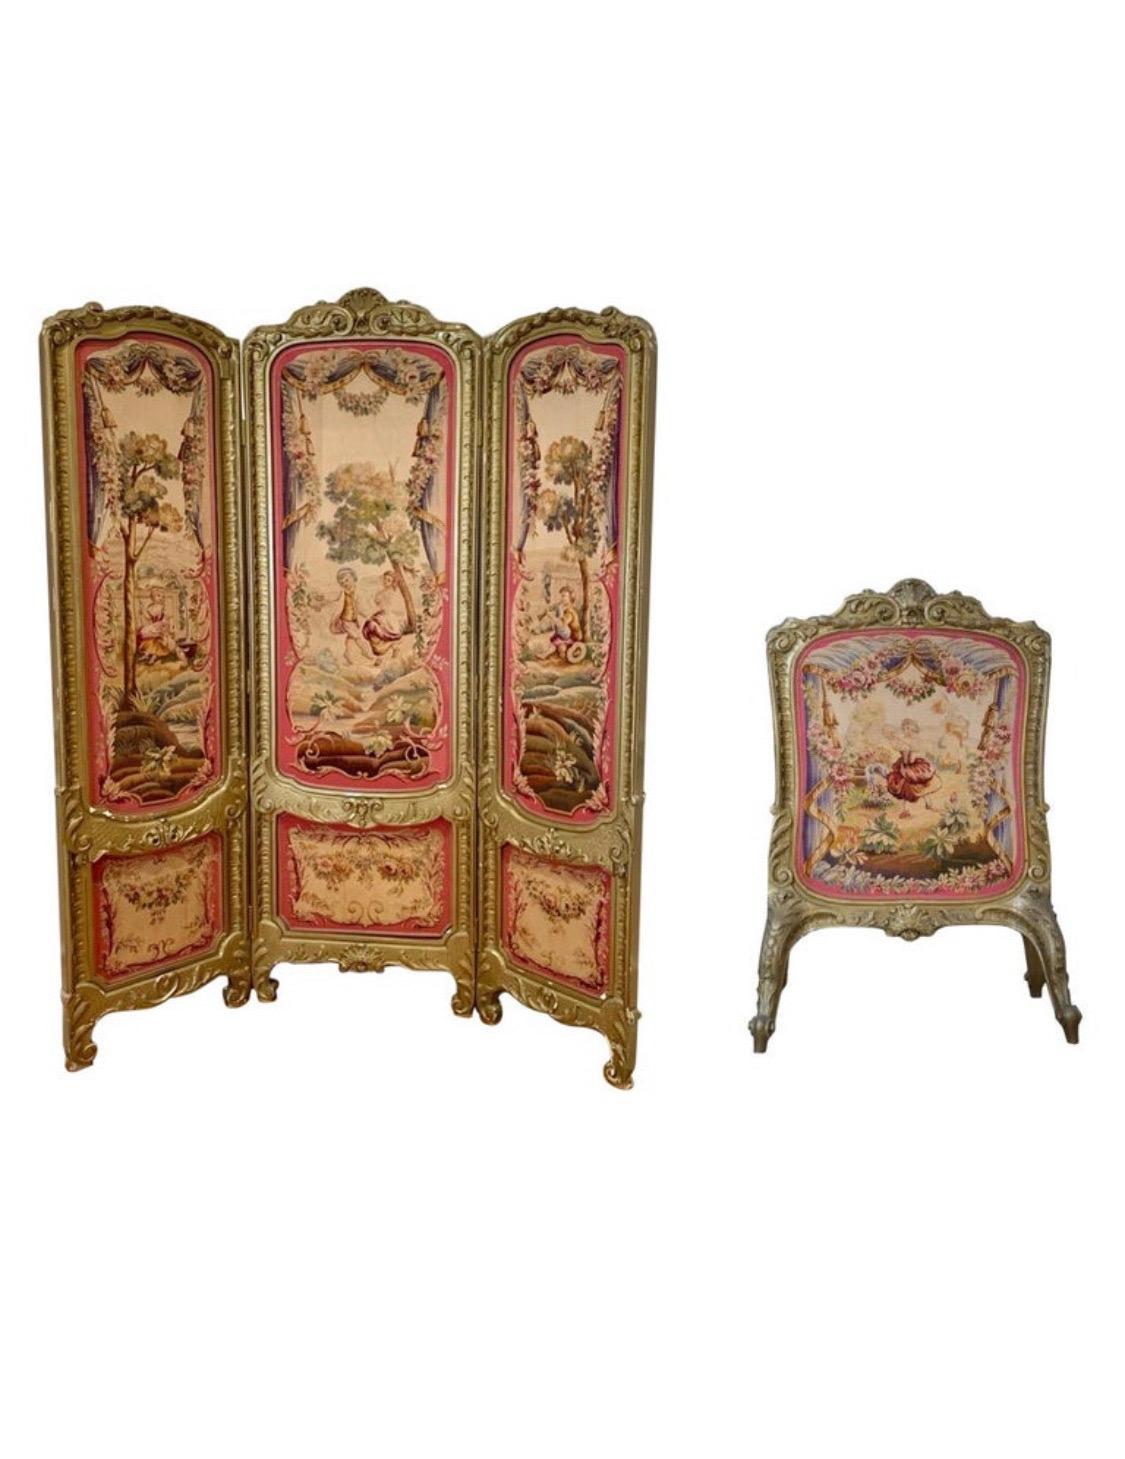 19th Century Louis XV Regency Gilded Screen and Fire Screen with Tapestries For Sale 3